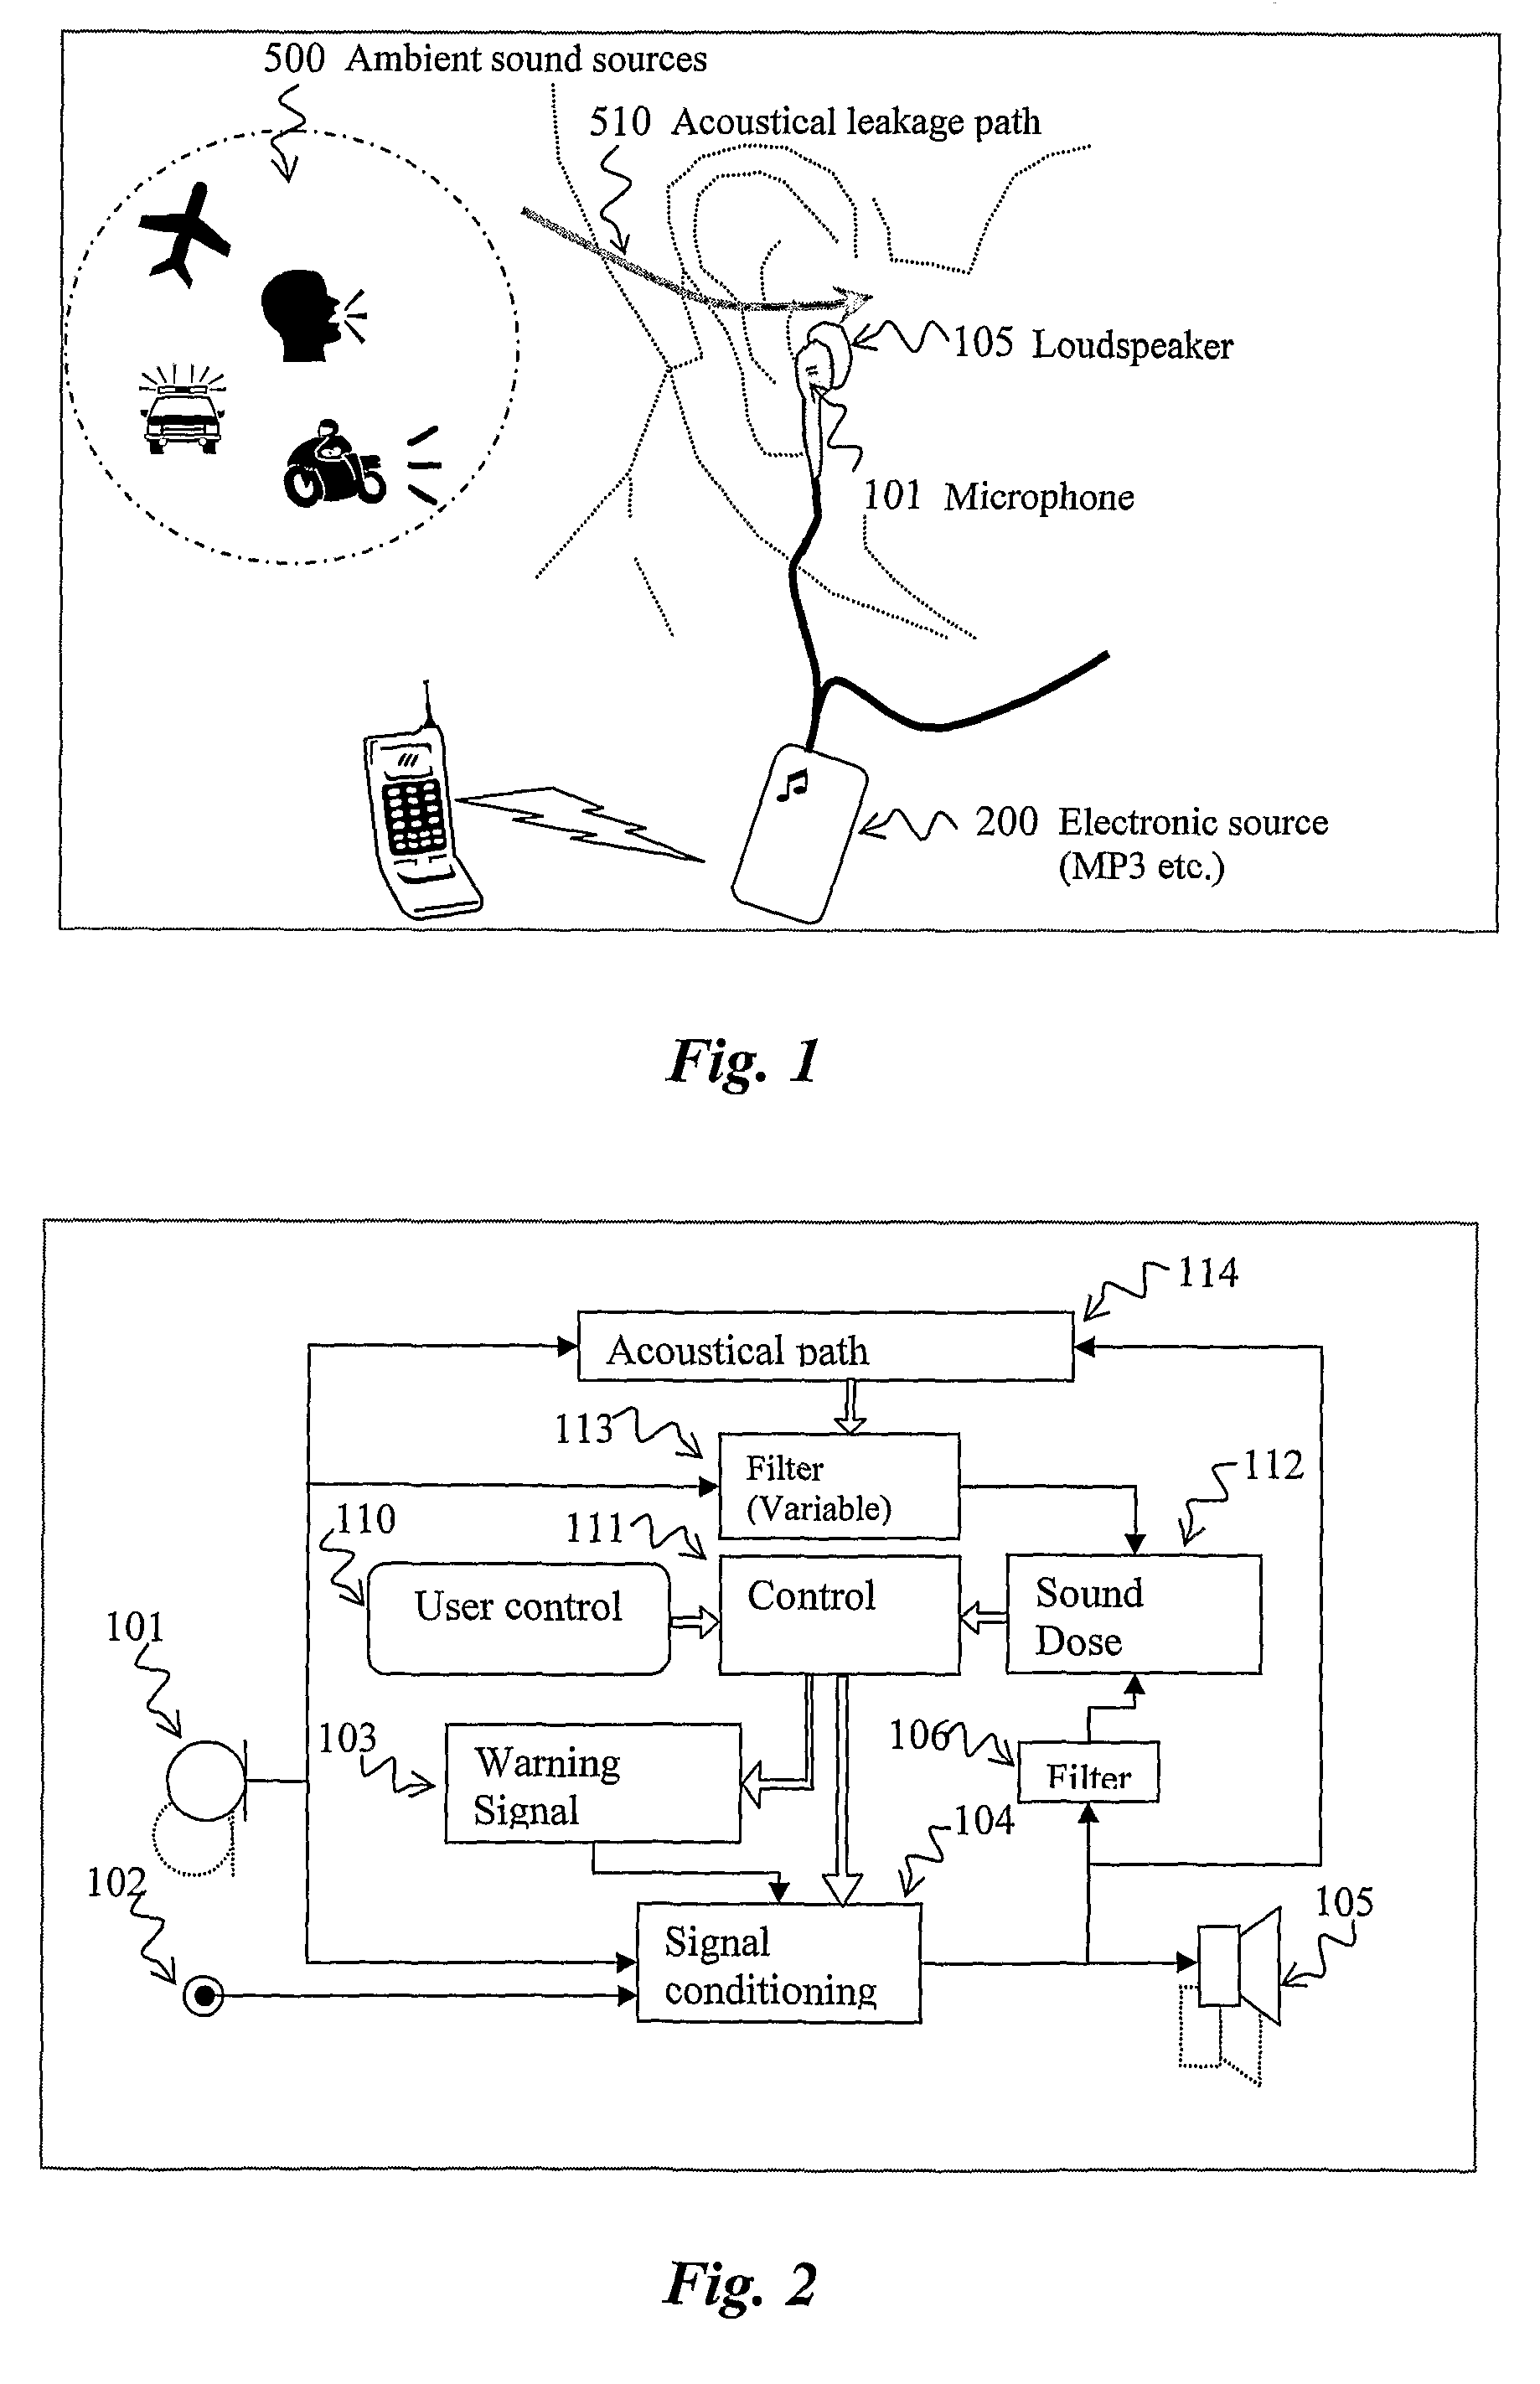 Apparatus for reducing the risk of noise induced hearing loss